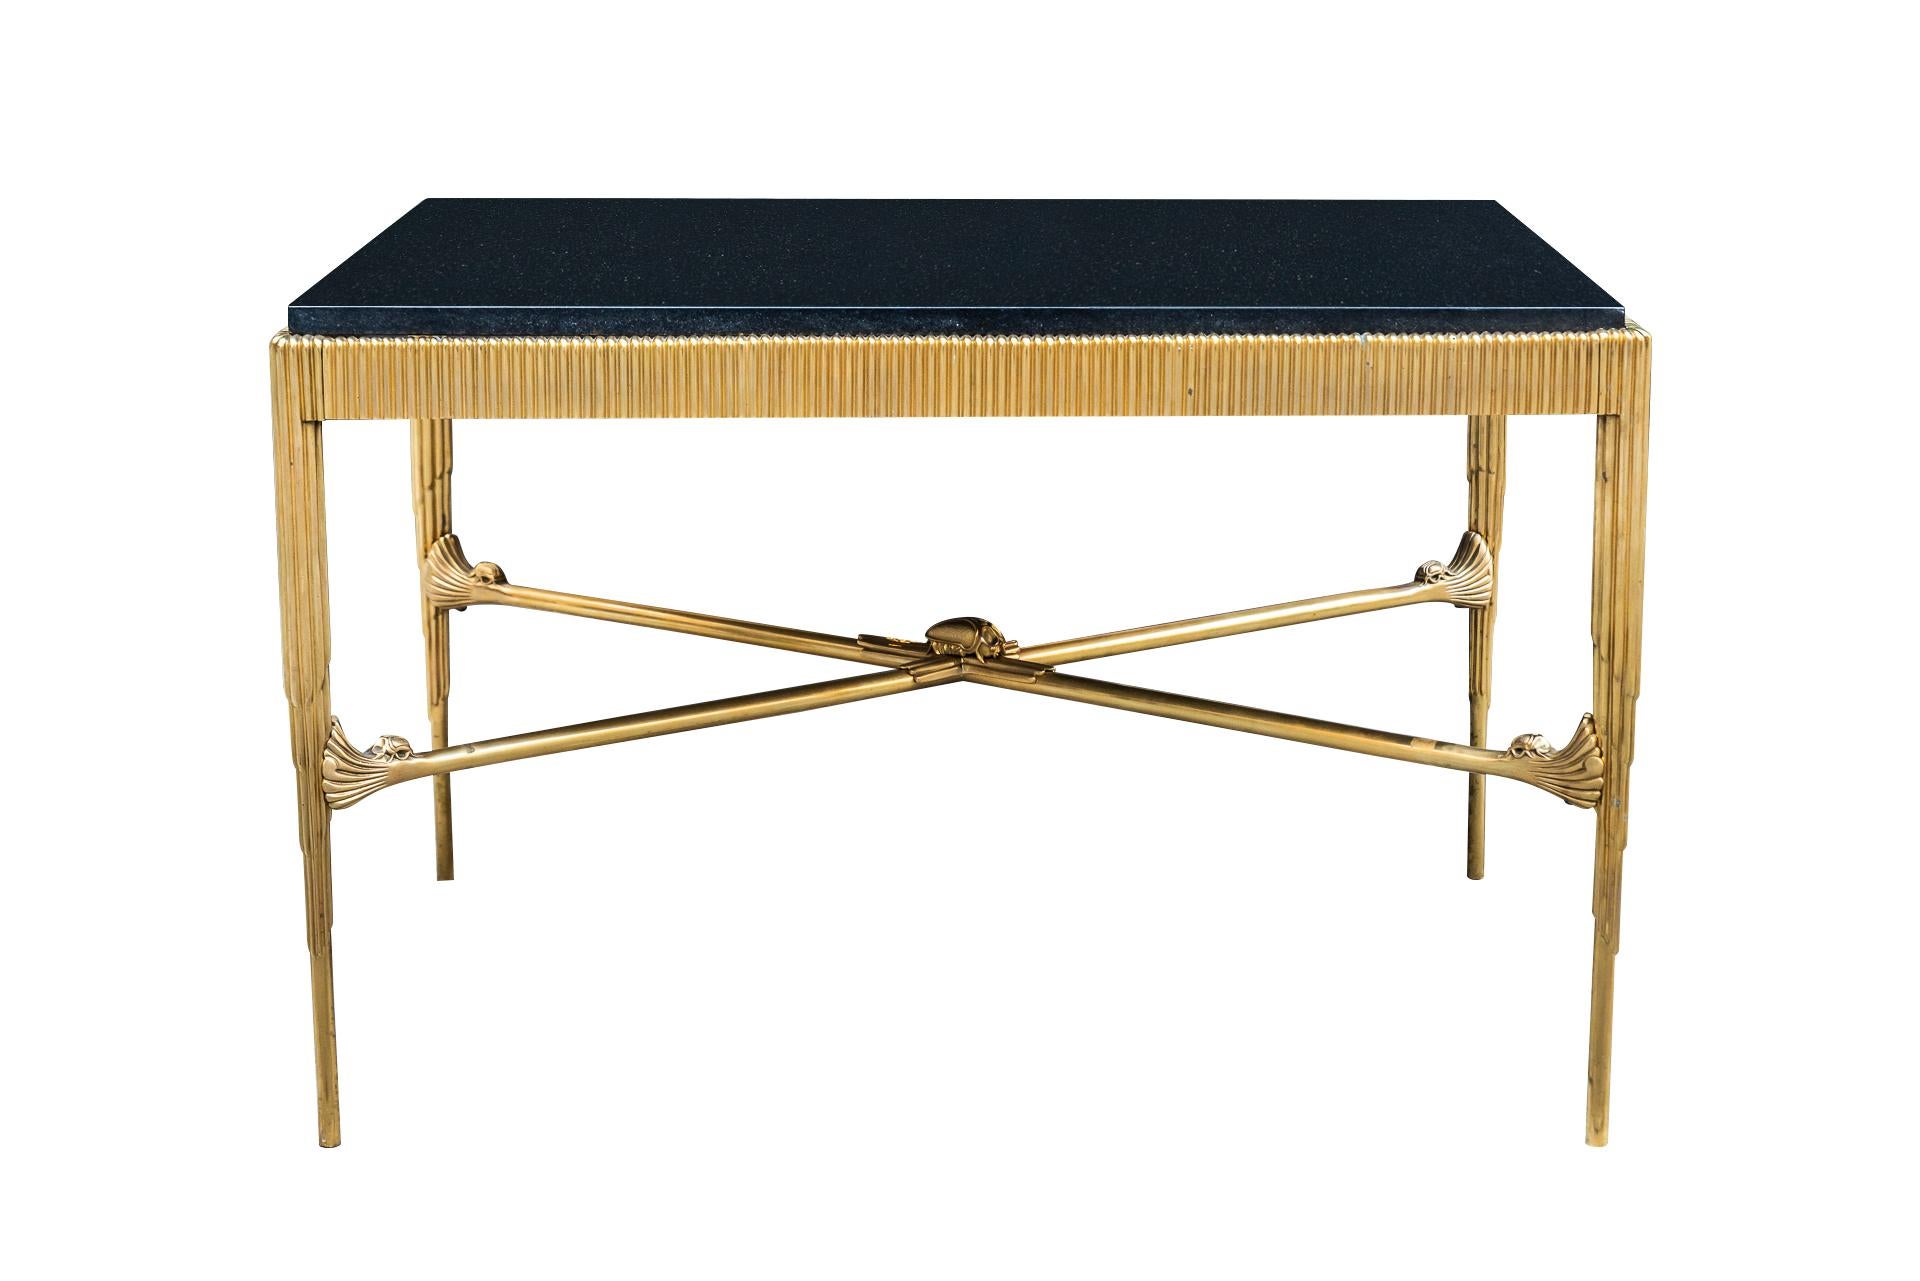 In the style of Armand-Albert Rateau, 
Pair of tables decorated with a beetle, 
Bronze gilded with 24-carat gold,
Granit tabletop,
Edition Tisserant,
France, circa 1990.

Measures: Width 95 cm, depth 66 cm, height 62 cm.